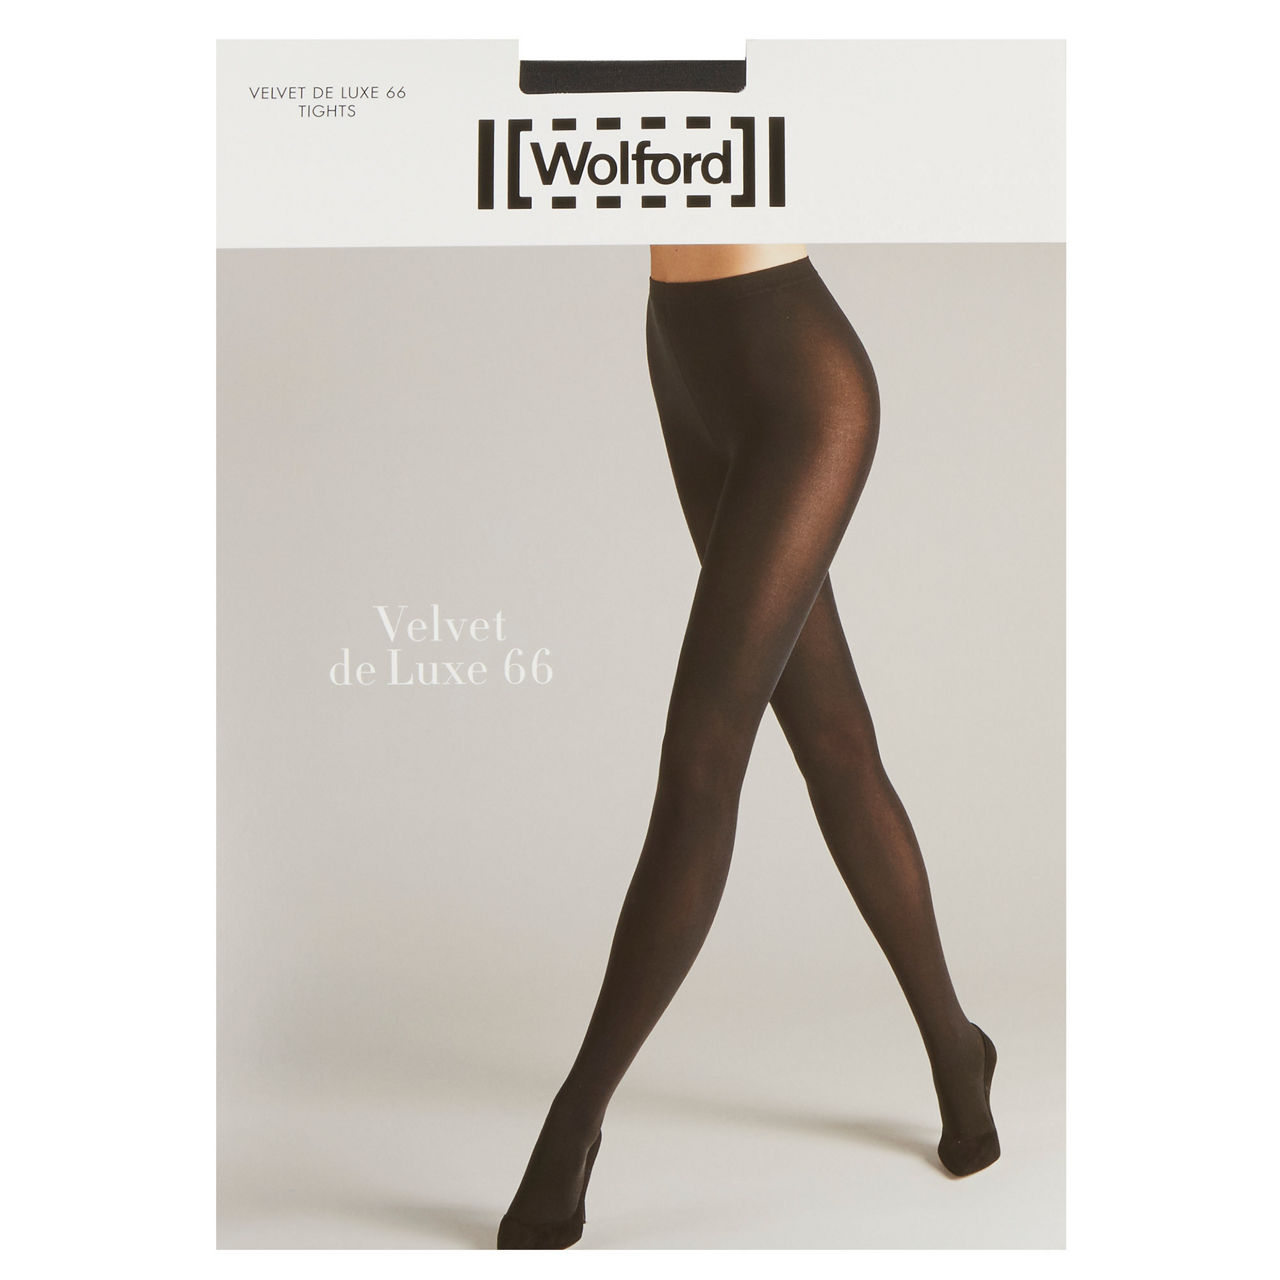 Wolford VELVET DE LUXE 50 TIGHTS Color Anthracite Size Small New In Package